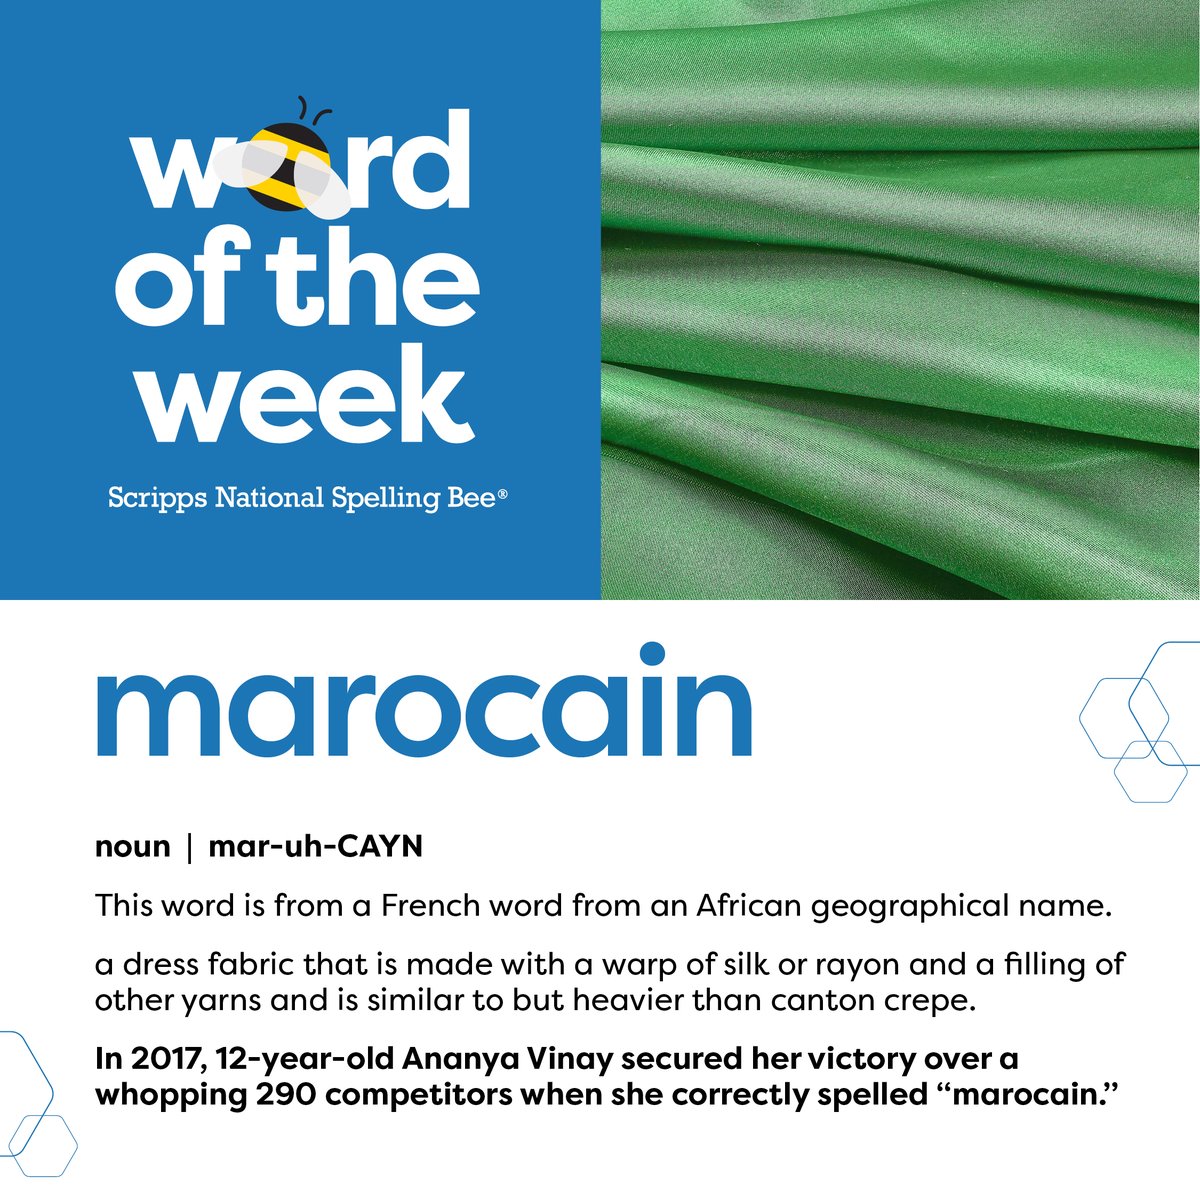 On a scale from 1 to 10, how likely would you be to correctly spell 'marocain' in a spelling bee? @MerriamWebster, the official dictionary of the Scripps National Spelling Bee. #wordoftheweek #spellingbee